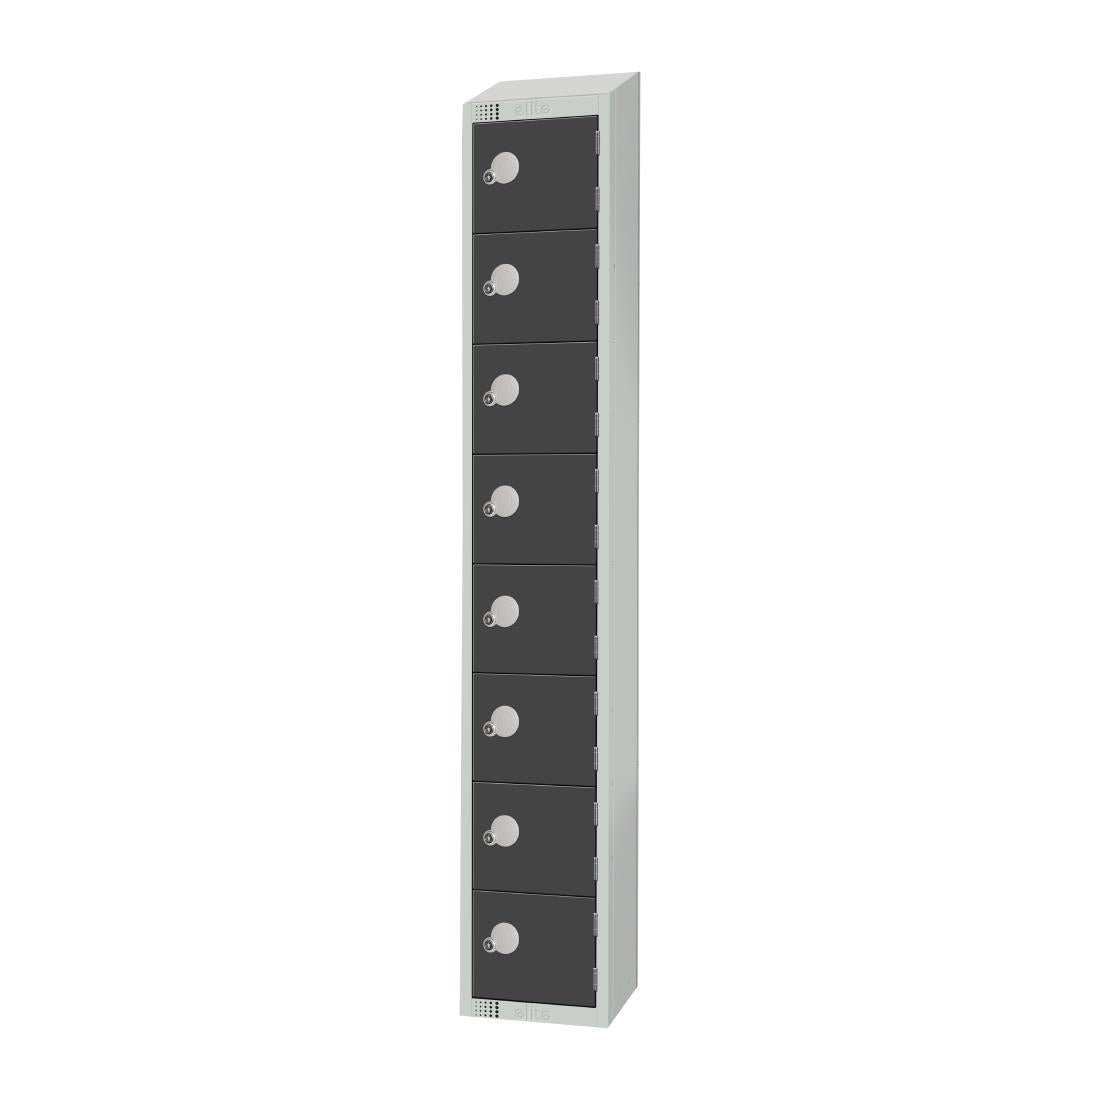 GR683-CNS Elite Eight Door Coin Return Locker with Sloping Top Graphite Grey JD Catering Equipment Solutions Ltd